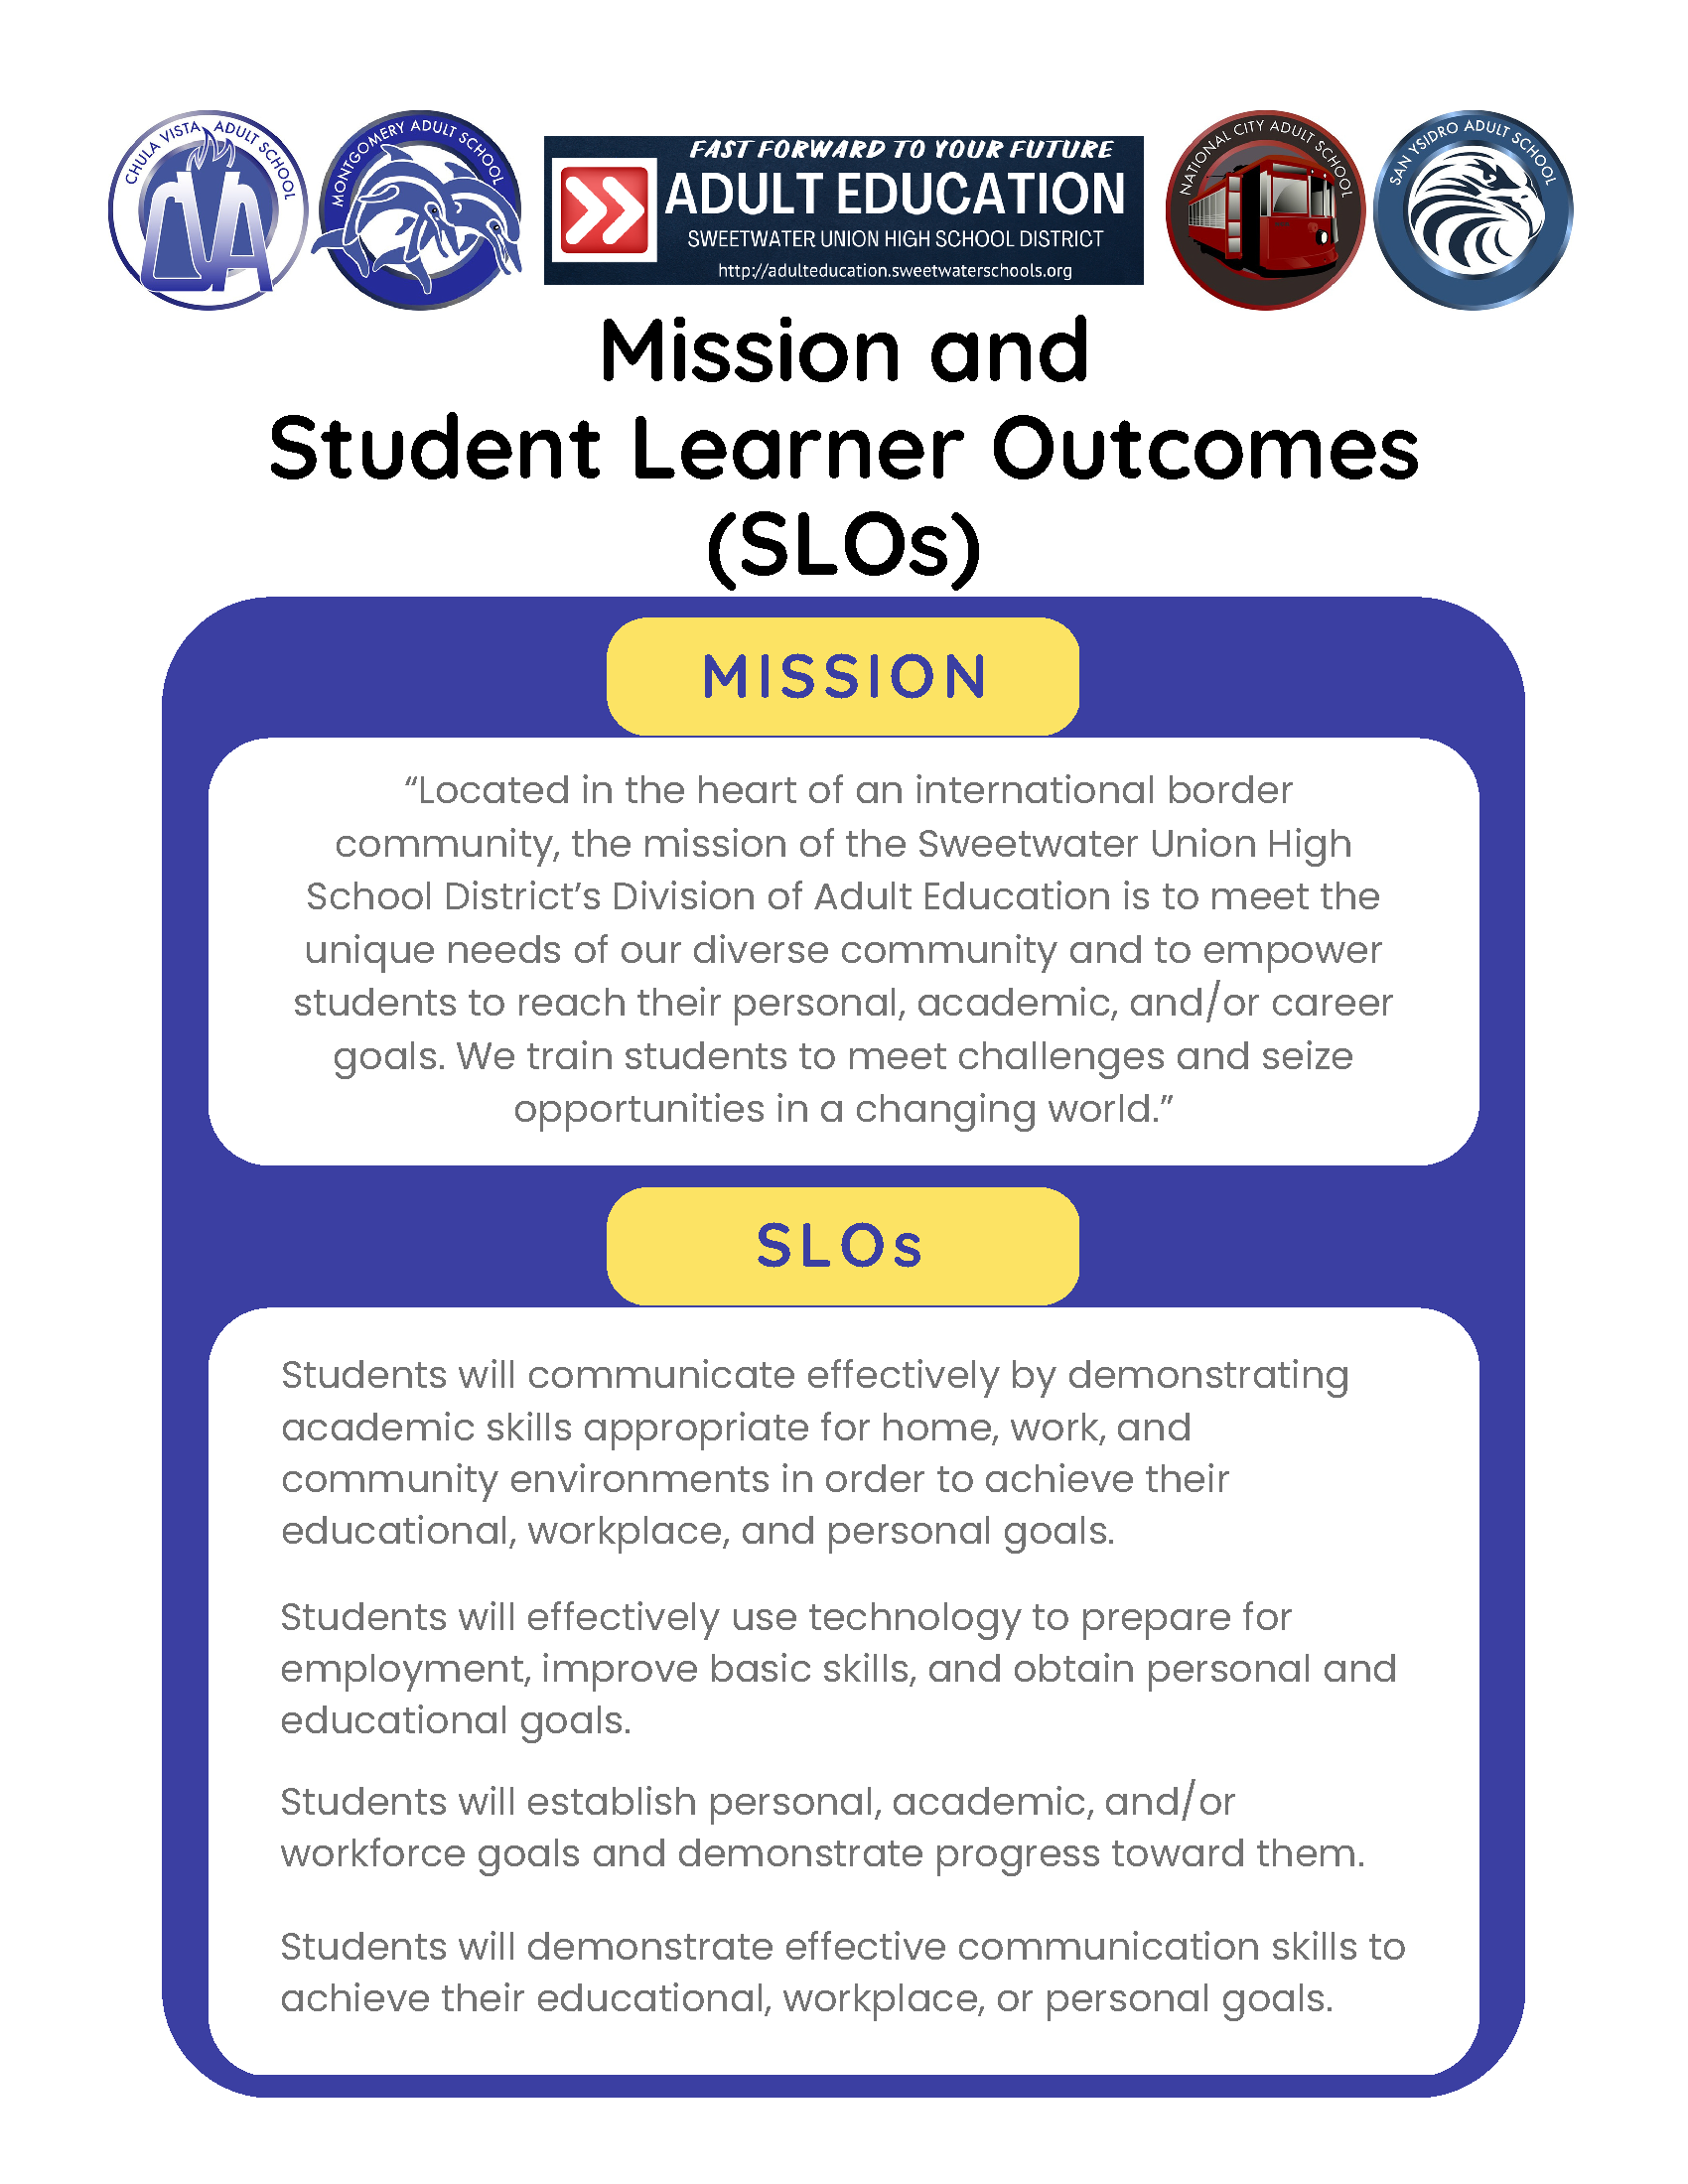 Adult Ed mission and student learner outcomes.